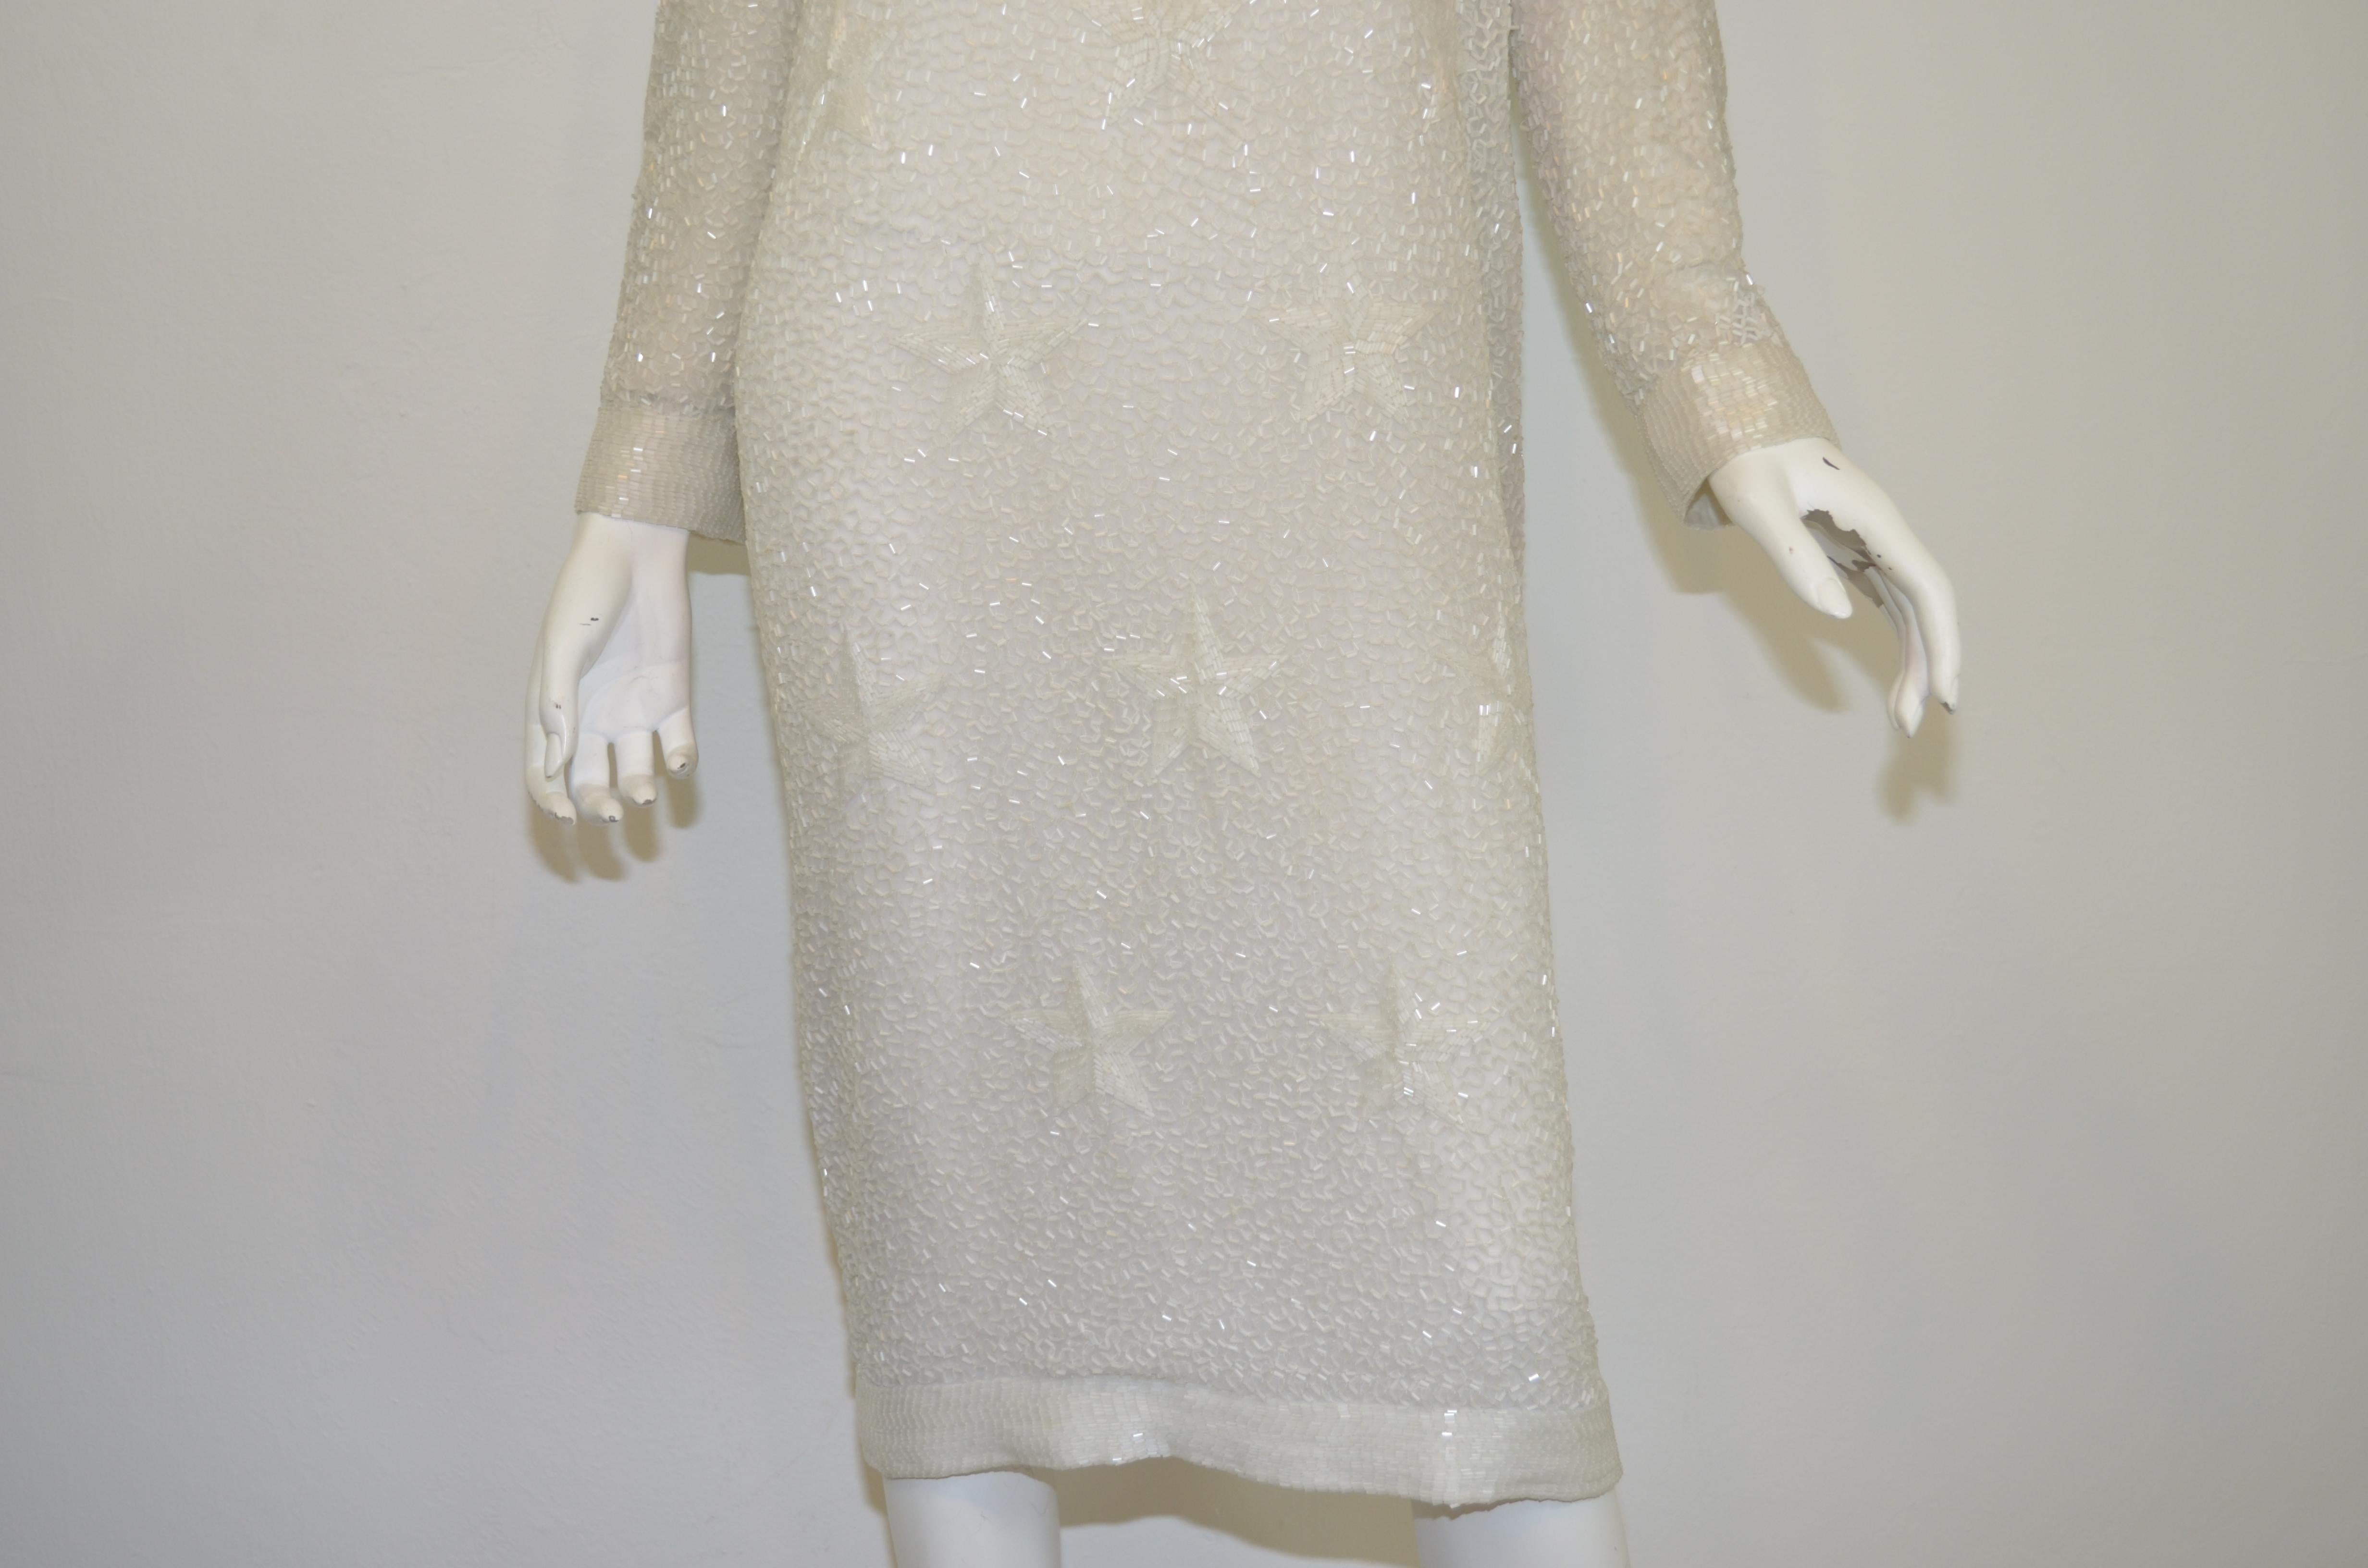 AMAZING Bob Mackie fully beaded dress featured in an off-white color with a star motif. Dress has a deep V-neckline and a back zipper fastening. Fully lined.

Measurements: 
Bust 40”, waist 38”, hips 41”, length 43”, sleeves 24”, shoulder to